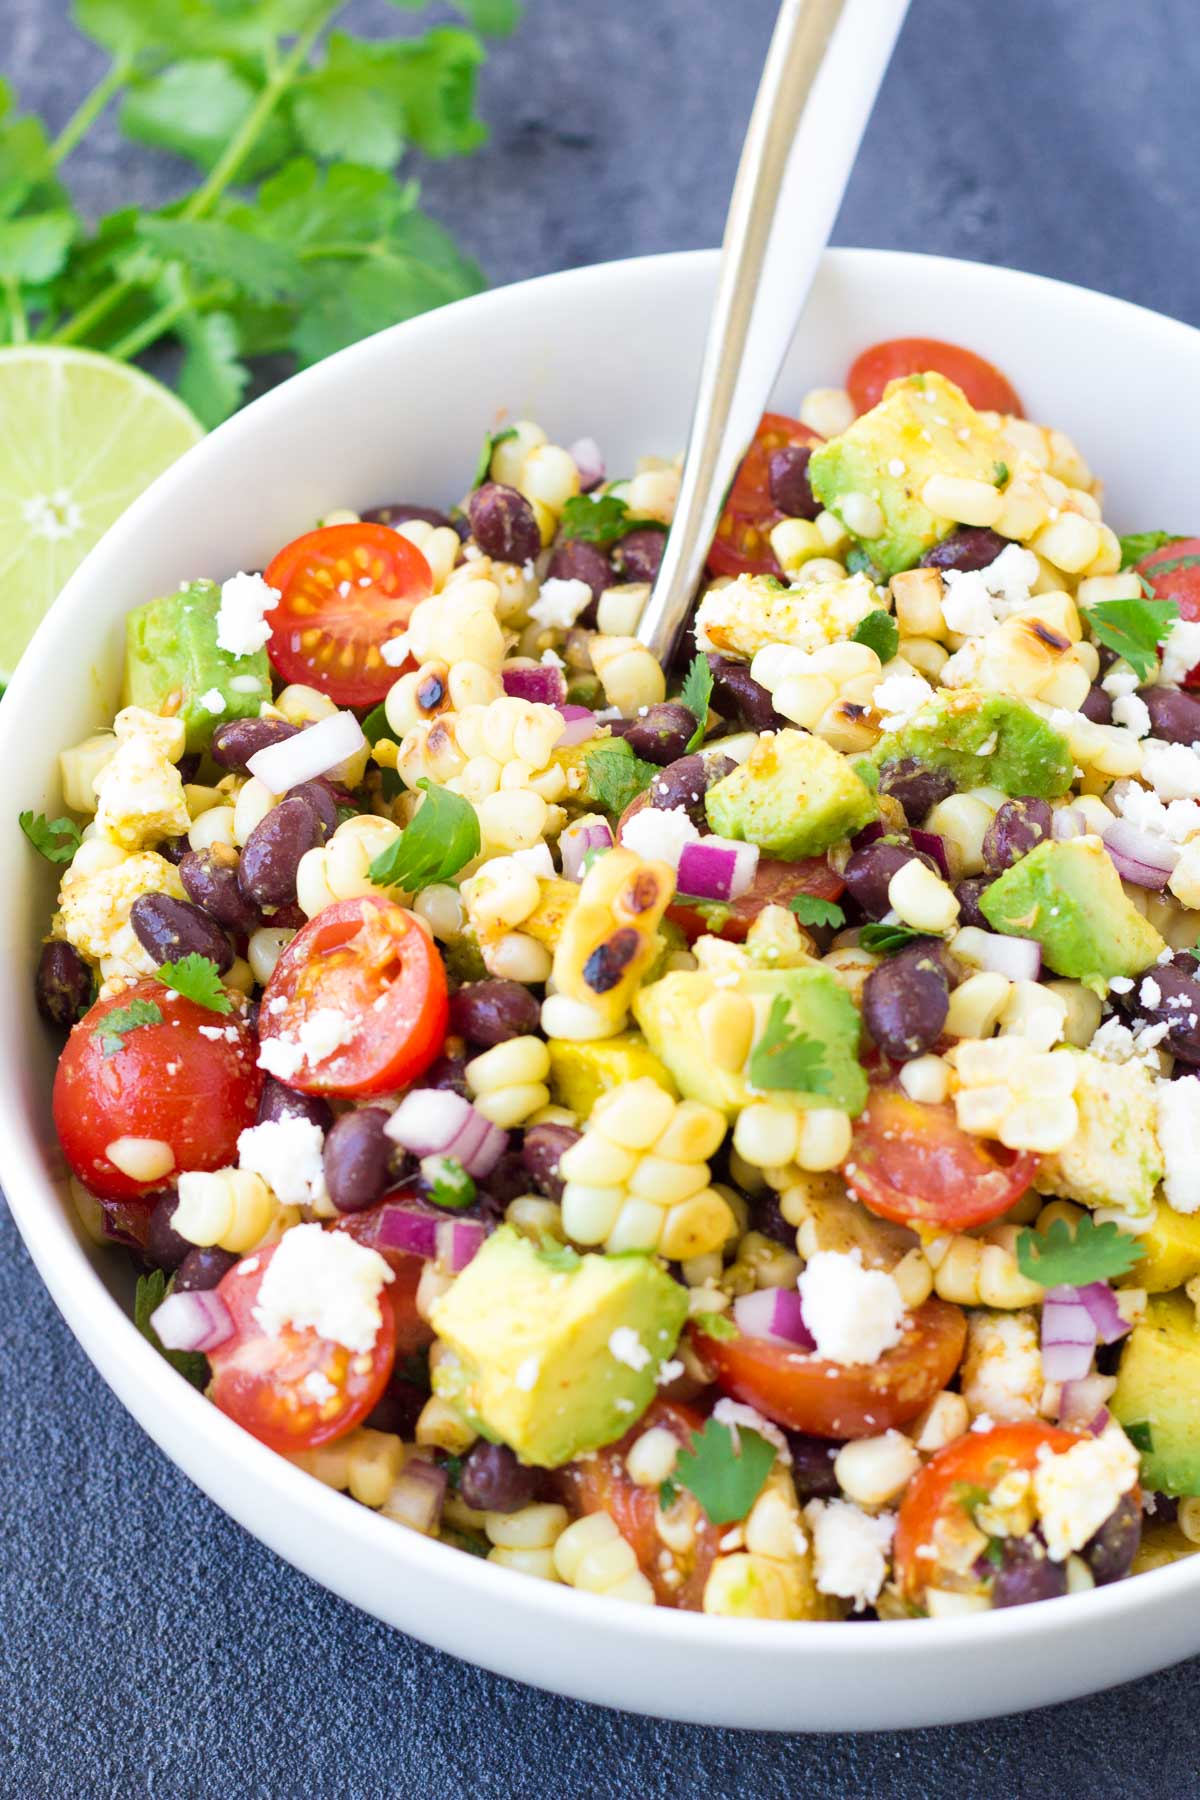 Corn salad with black beans, avocado and tomatoes in a white serving bowl with a spoon.